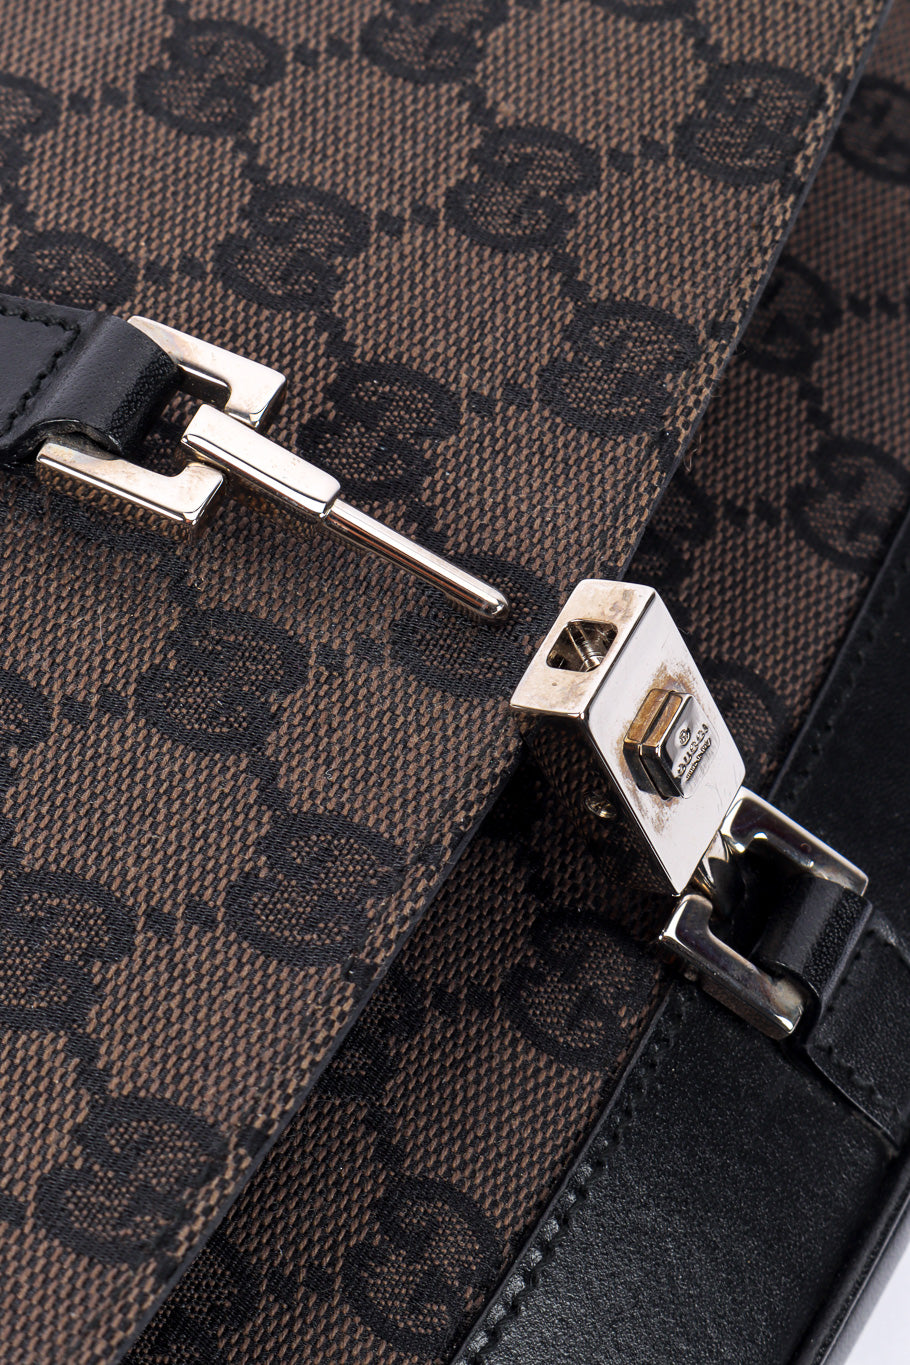 GG Monogram Jackie Shoulder Bag by Gucci on white background clasp unclasped @recessla